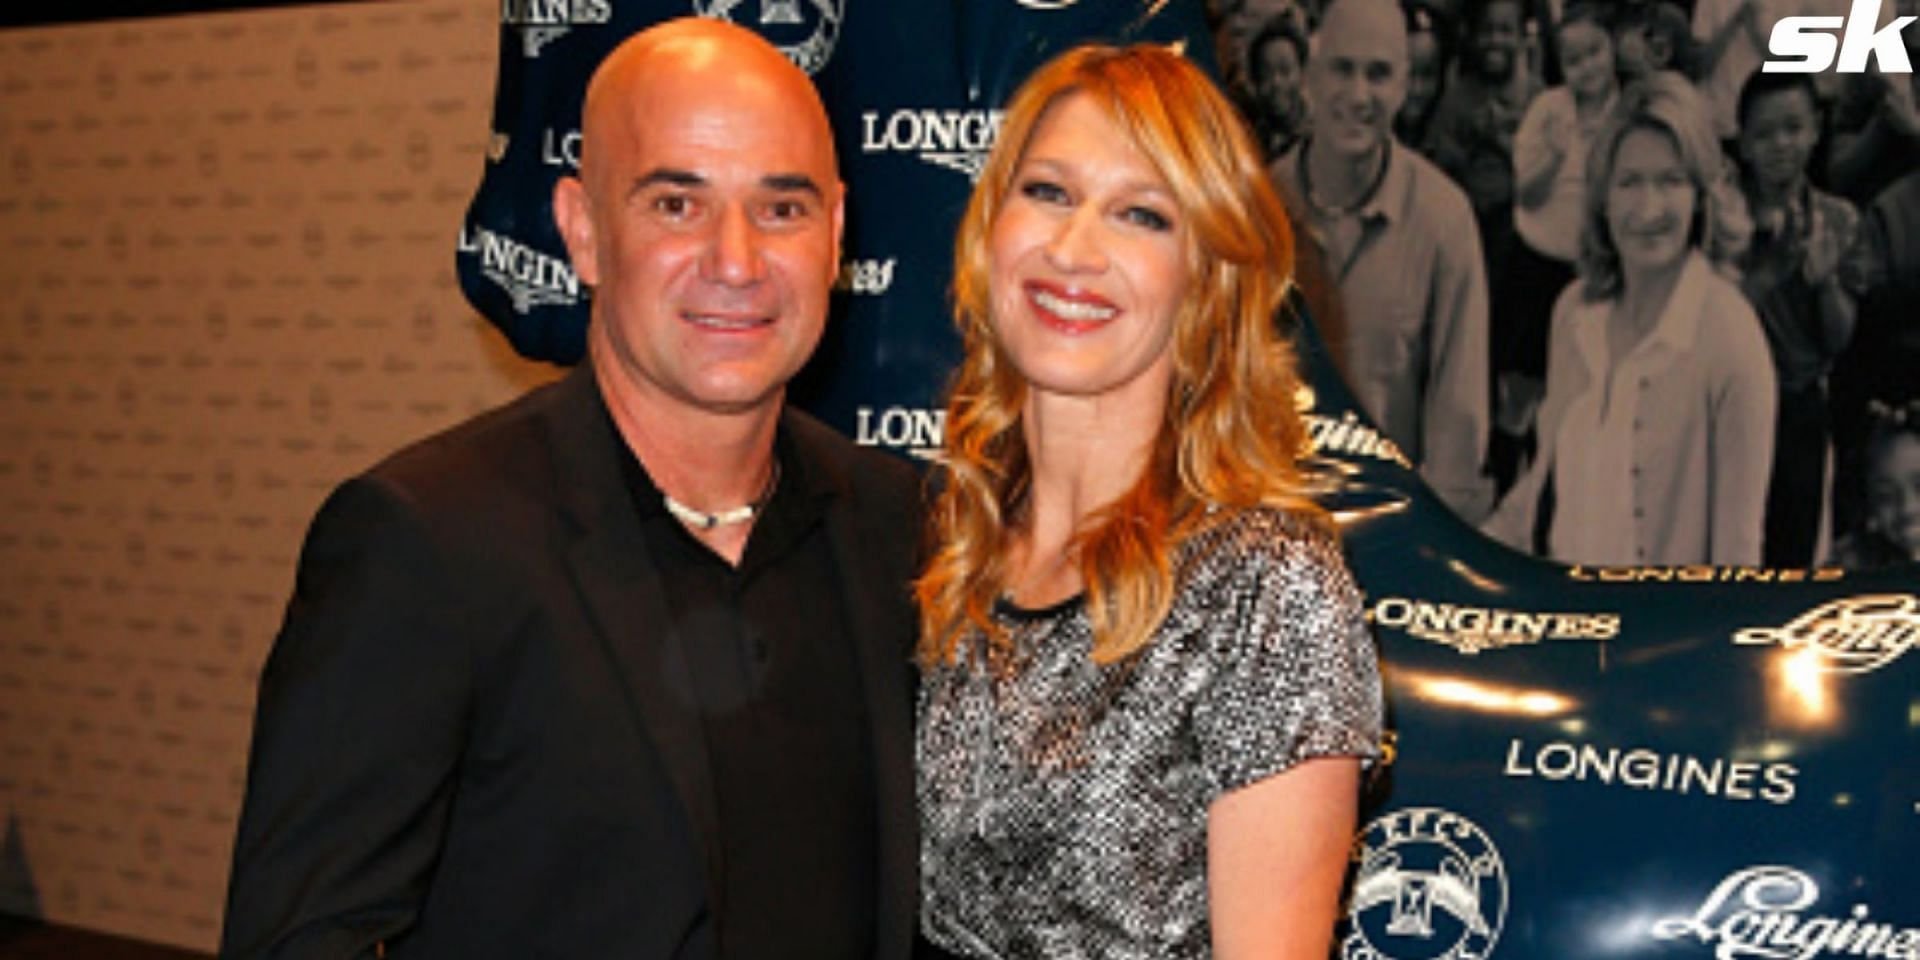 Andre Agassi fondly looks back on wife Steffi Graf's Wimbledon 1988 title win